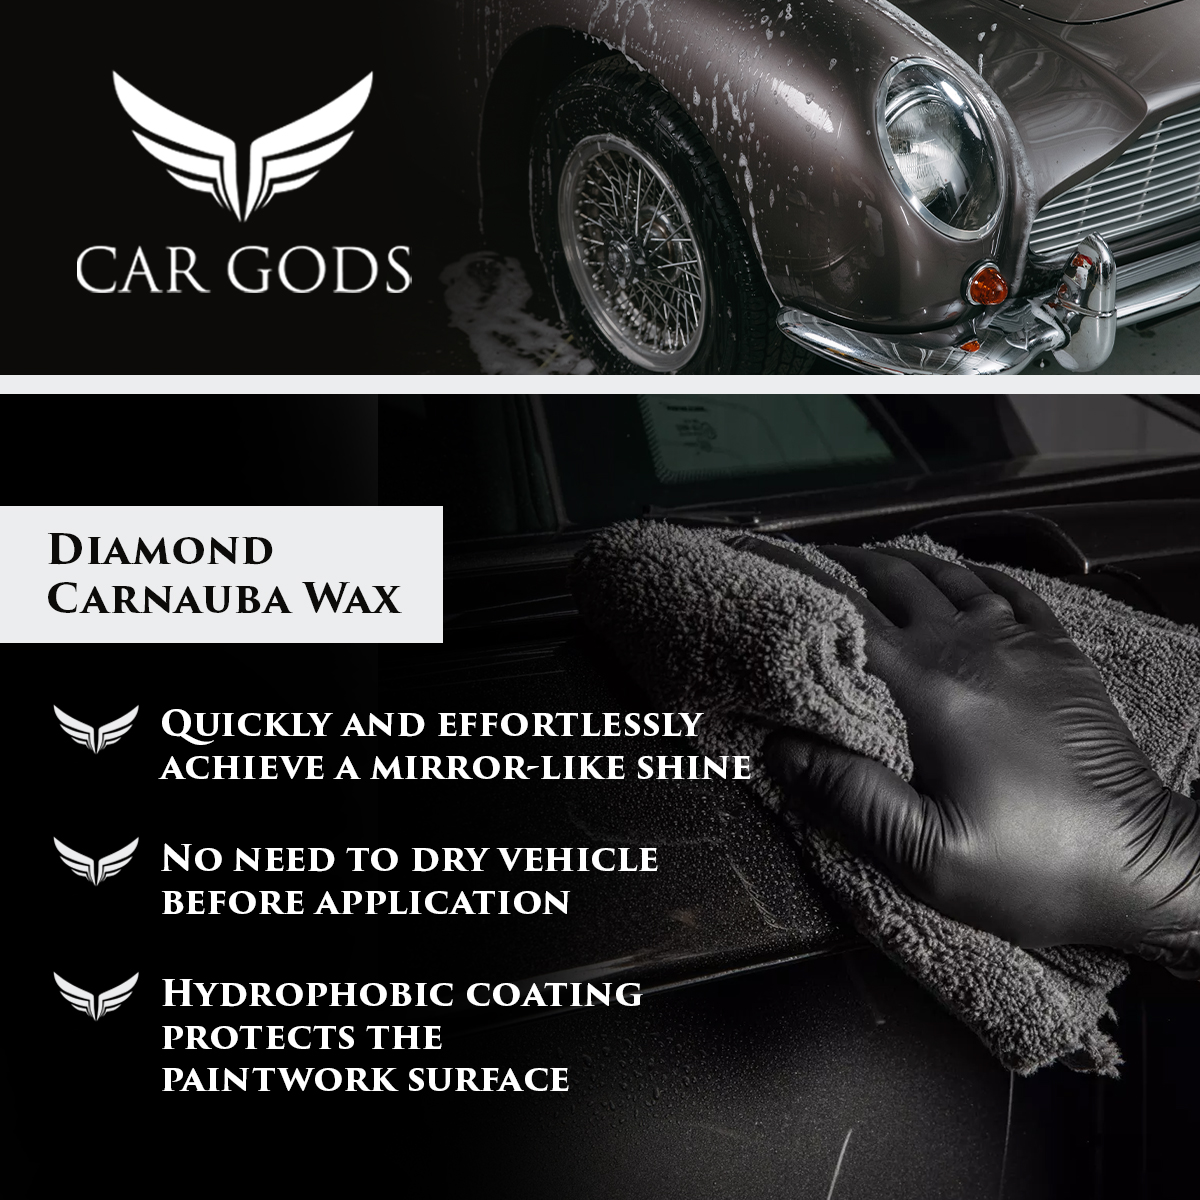 Car Gods Speed Shine Detailer. Quickly and effortlessly achieve a mirror-like shine with a hydrophobic coating to protect the paintwork surface. The ideal product top up traditional waxes and coatings between applications.